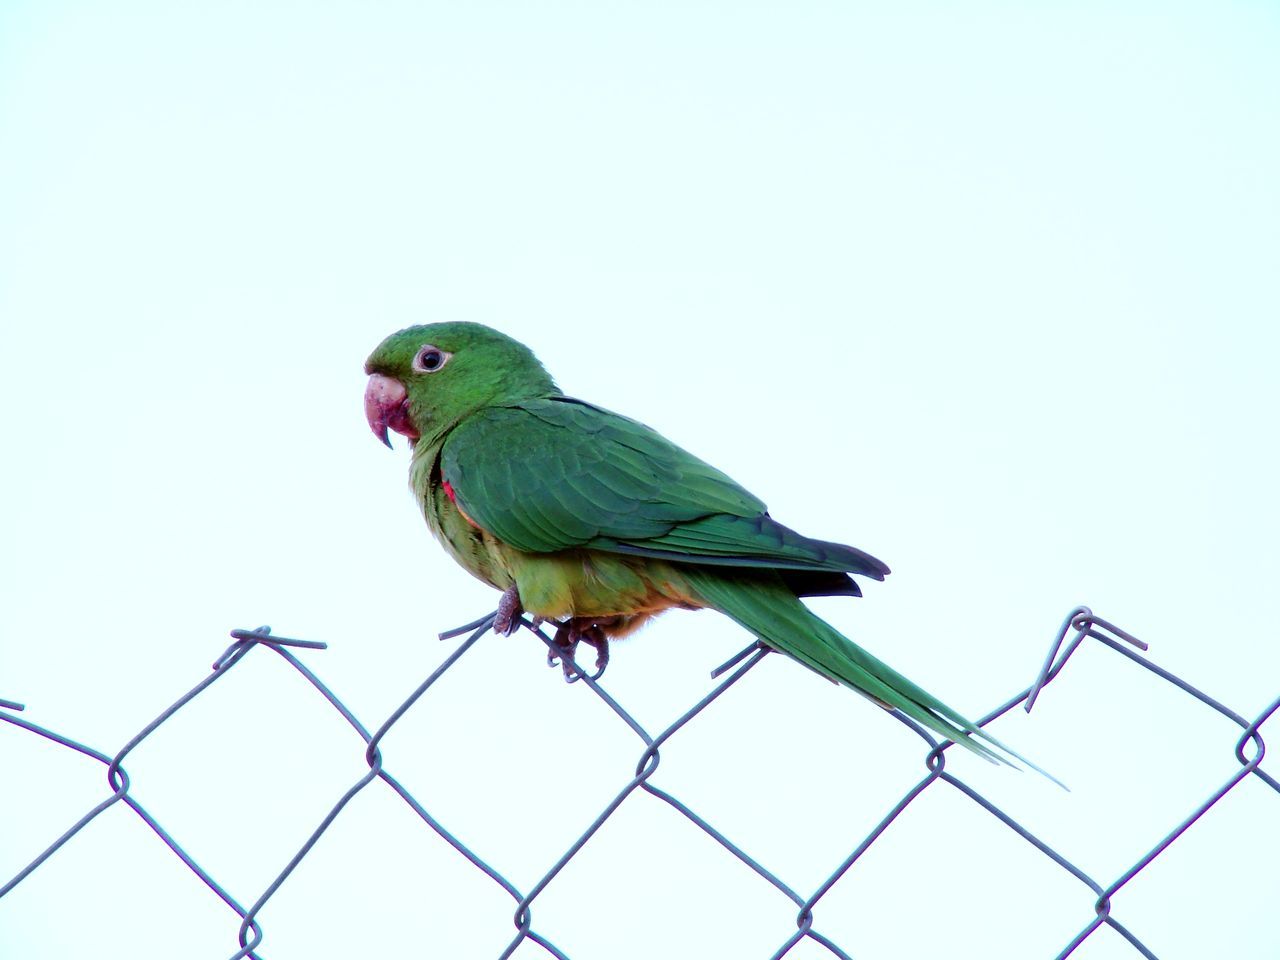 bird, animal themes, animal, pet, animal wildlife, parrot, fence, one animal, perching, nature, beak, sky, wildlife, clear sky, parakeet, no people, wing, day, green, outdoors, metal, environment, blue, wire